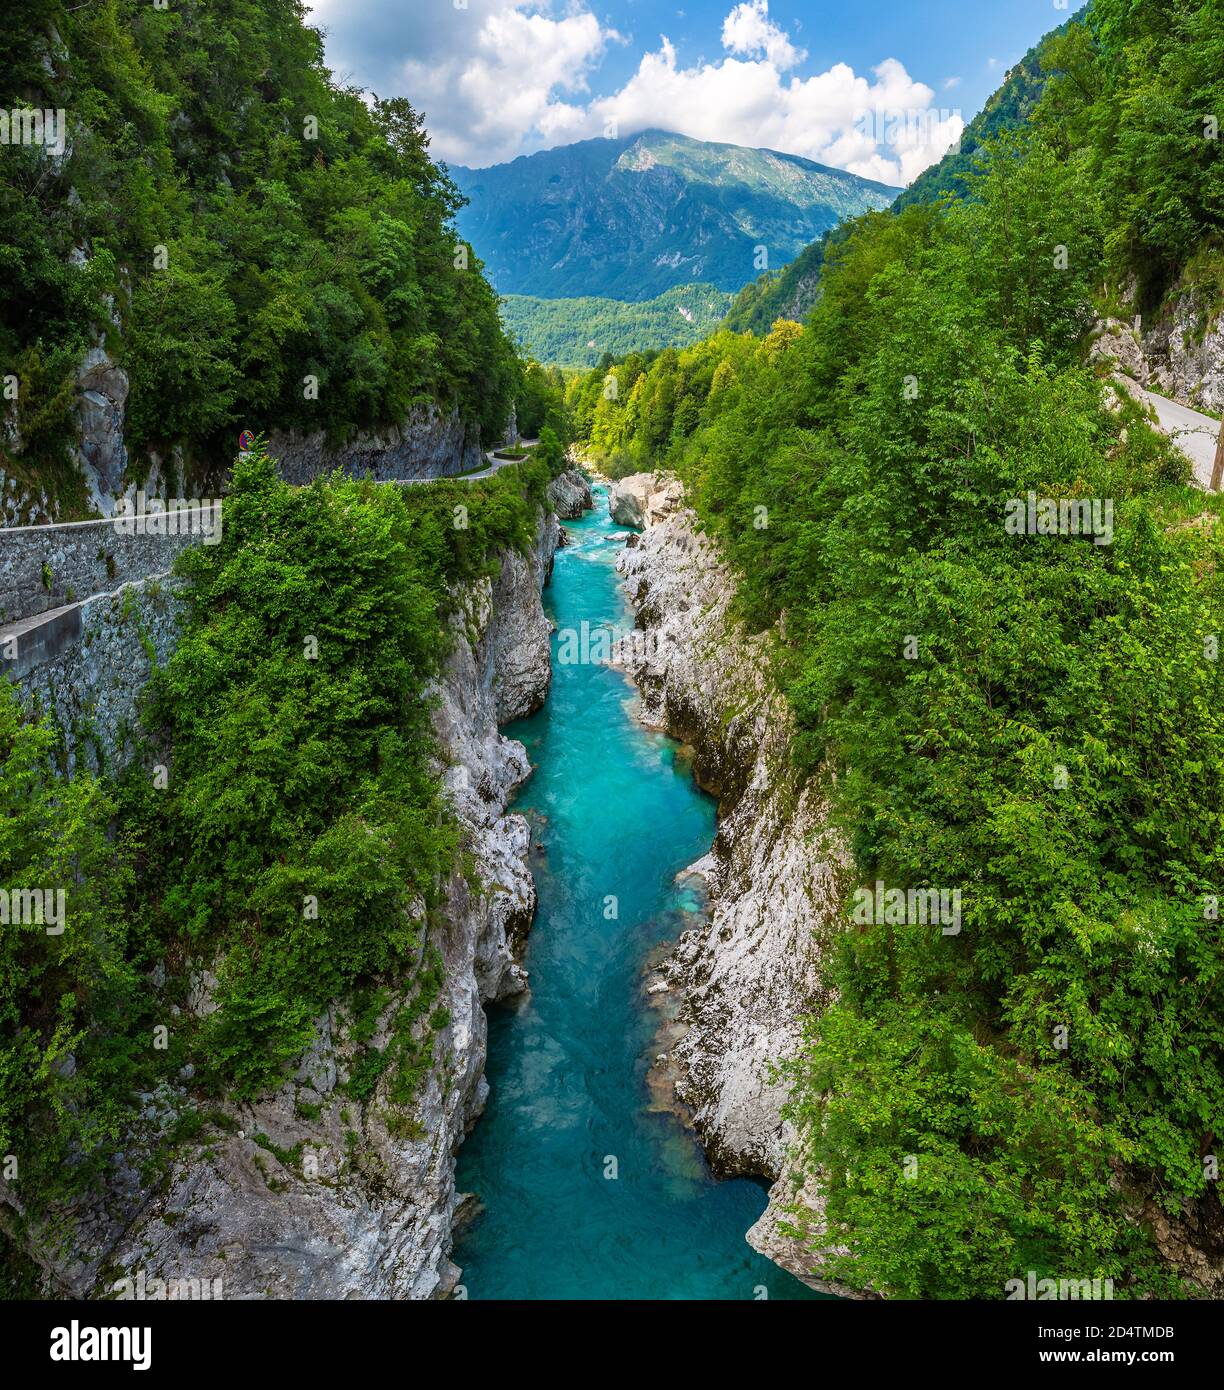 Soca Valley, Slovenia - River Soca is a beautiful turquoise water river in the Slovenian Alps located near the town of Kobarid in Triglav National Par Stock Photo